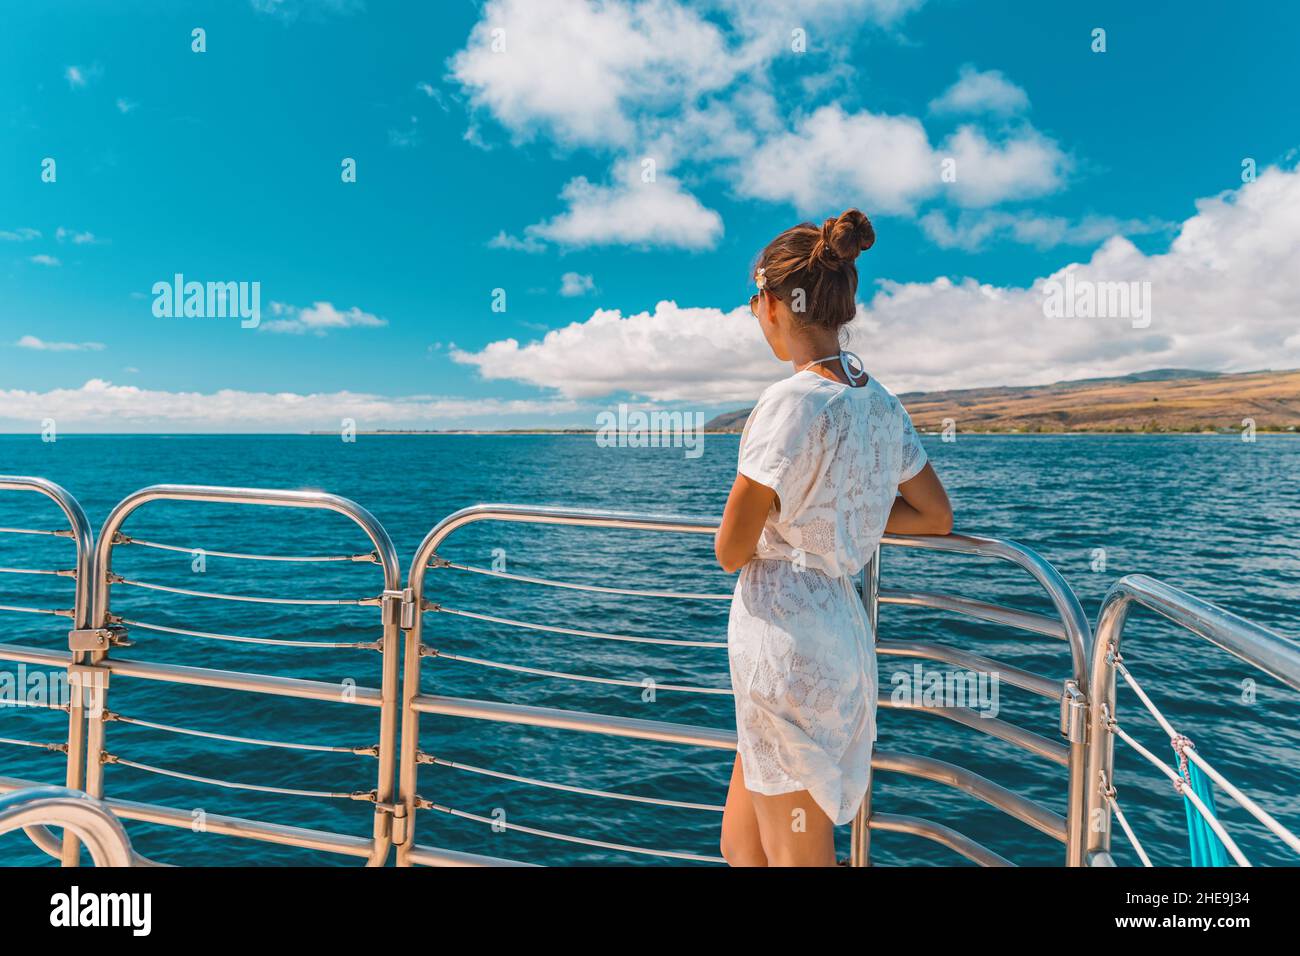 Cruise ship elegant lady in white cover up beach dress relaxing on boat deck watching scenery landscape on Mediterranean sea, Europe summer travel Stock Photo